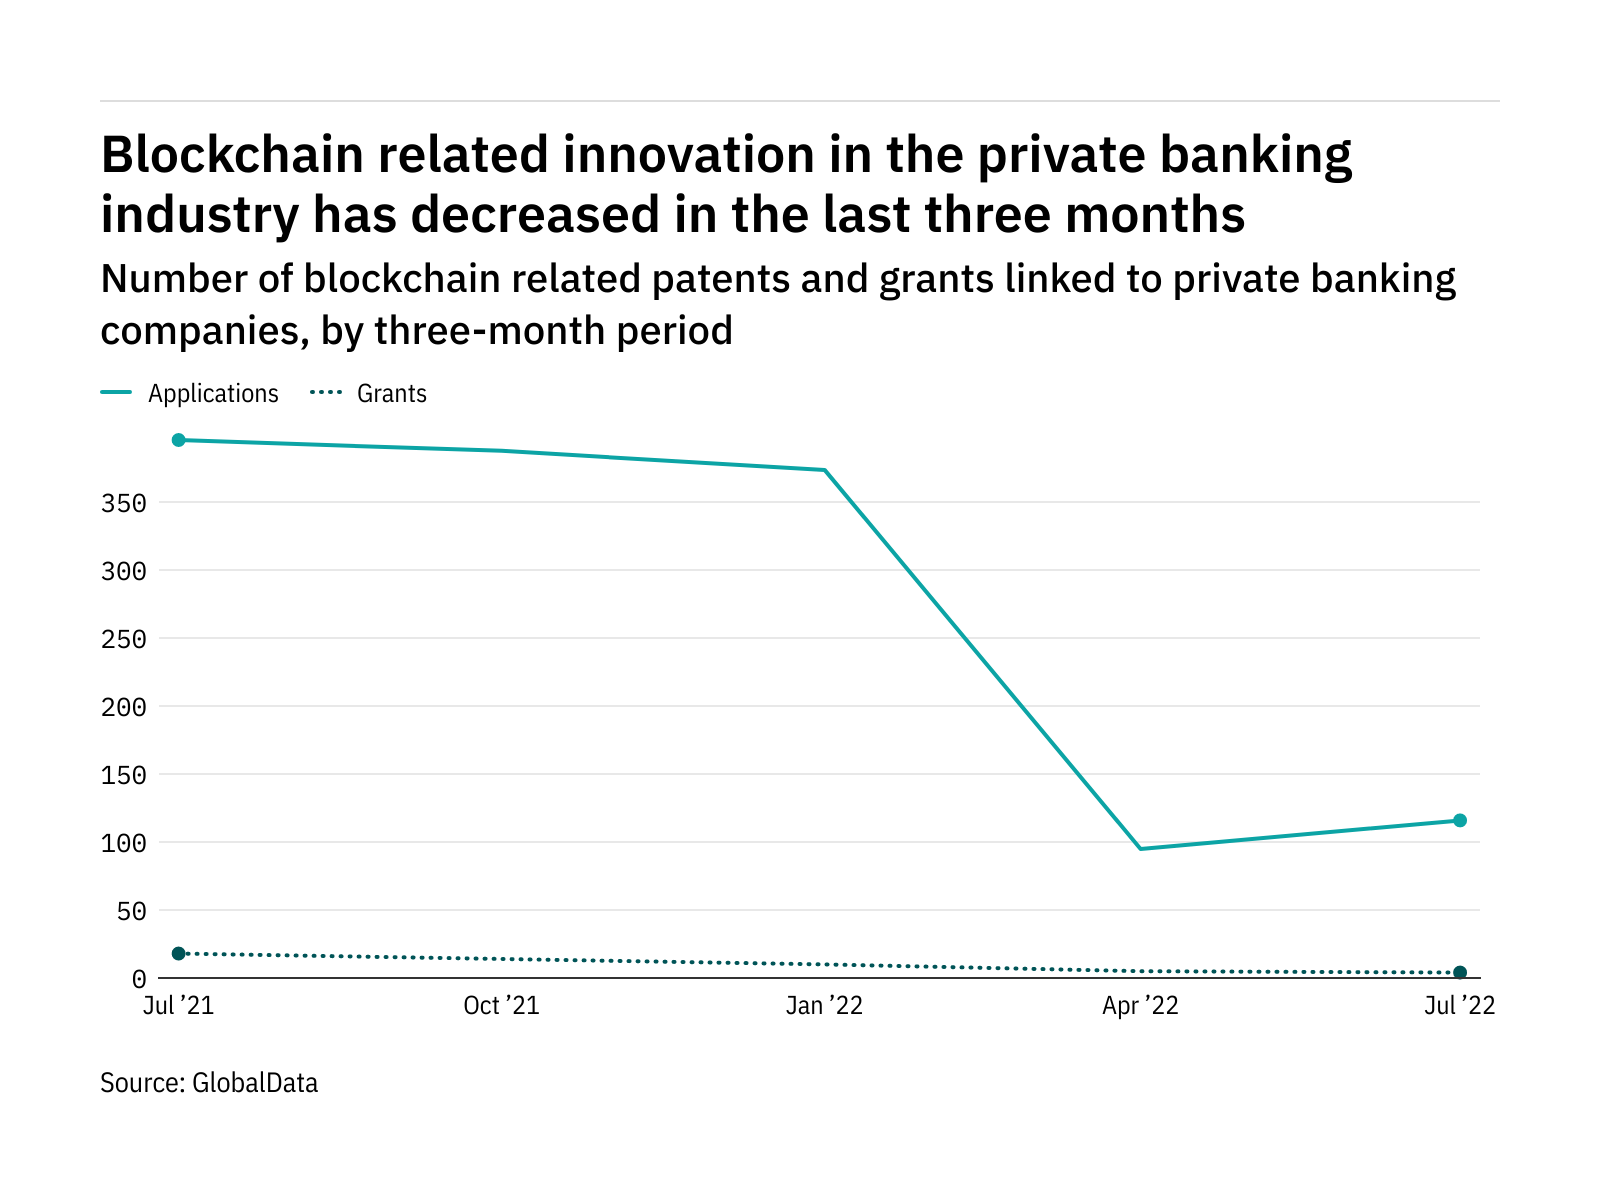 Blockchain innovation among private banking industry companies has dropped off in the last year